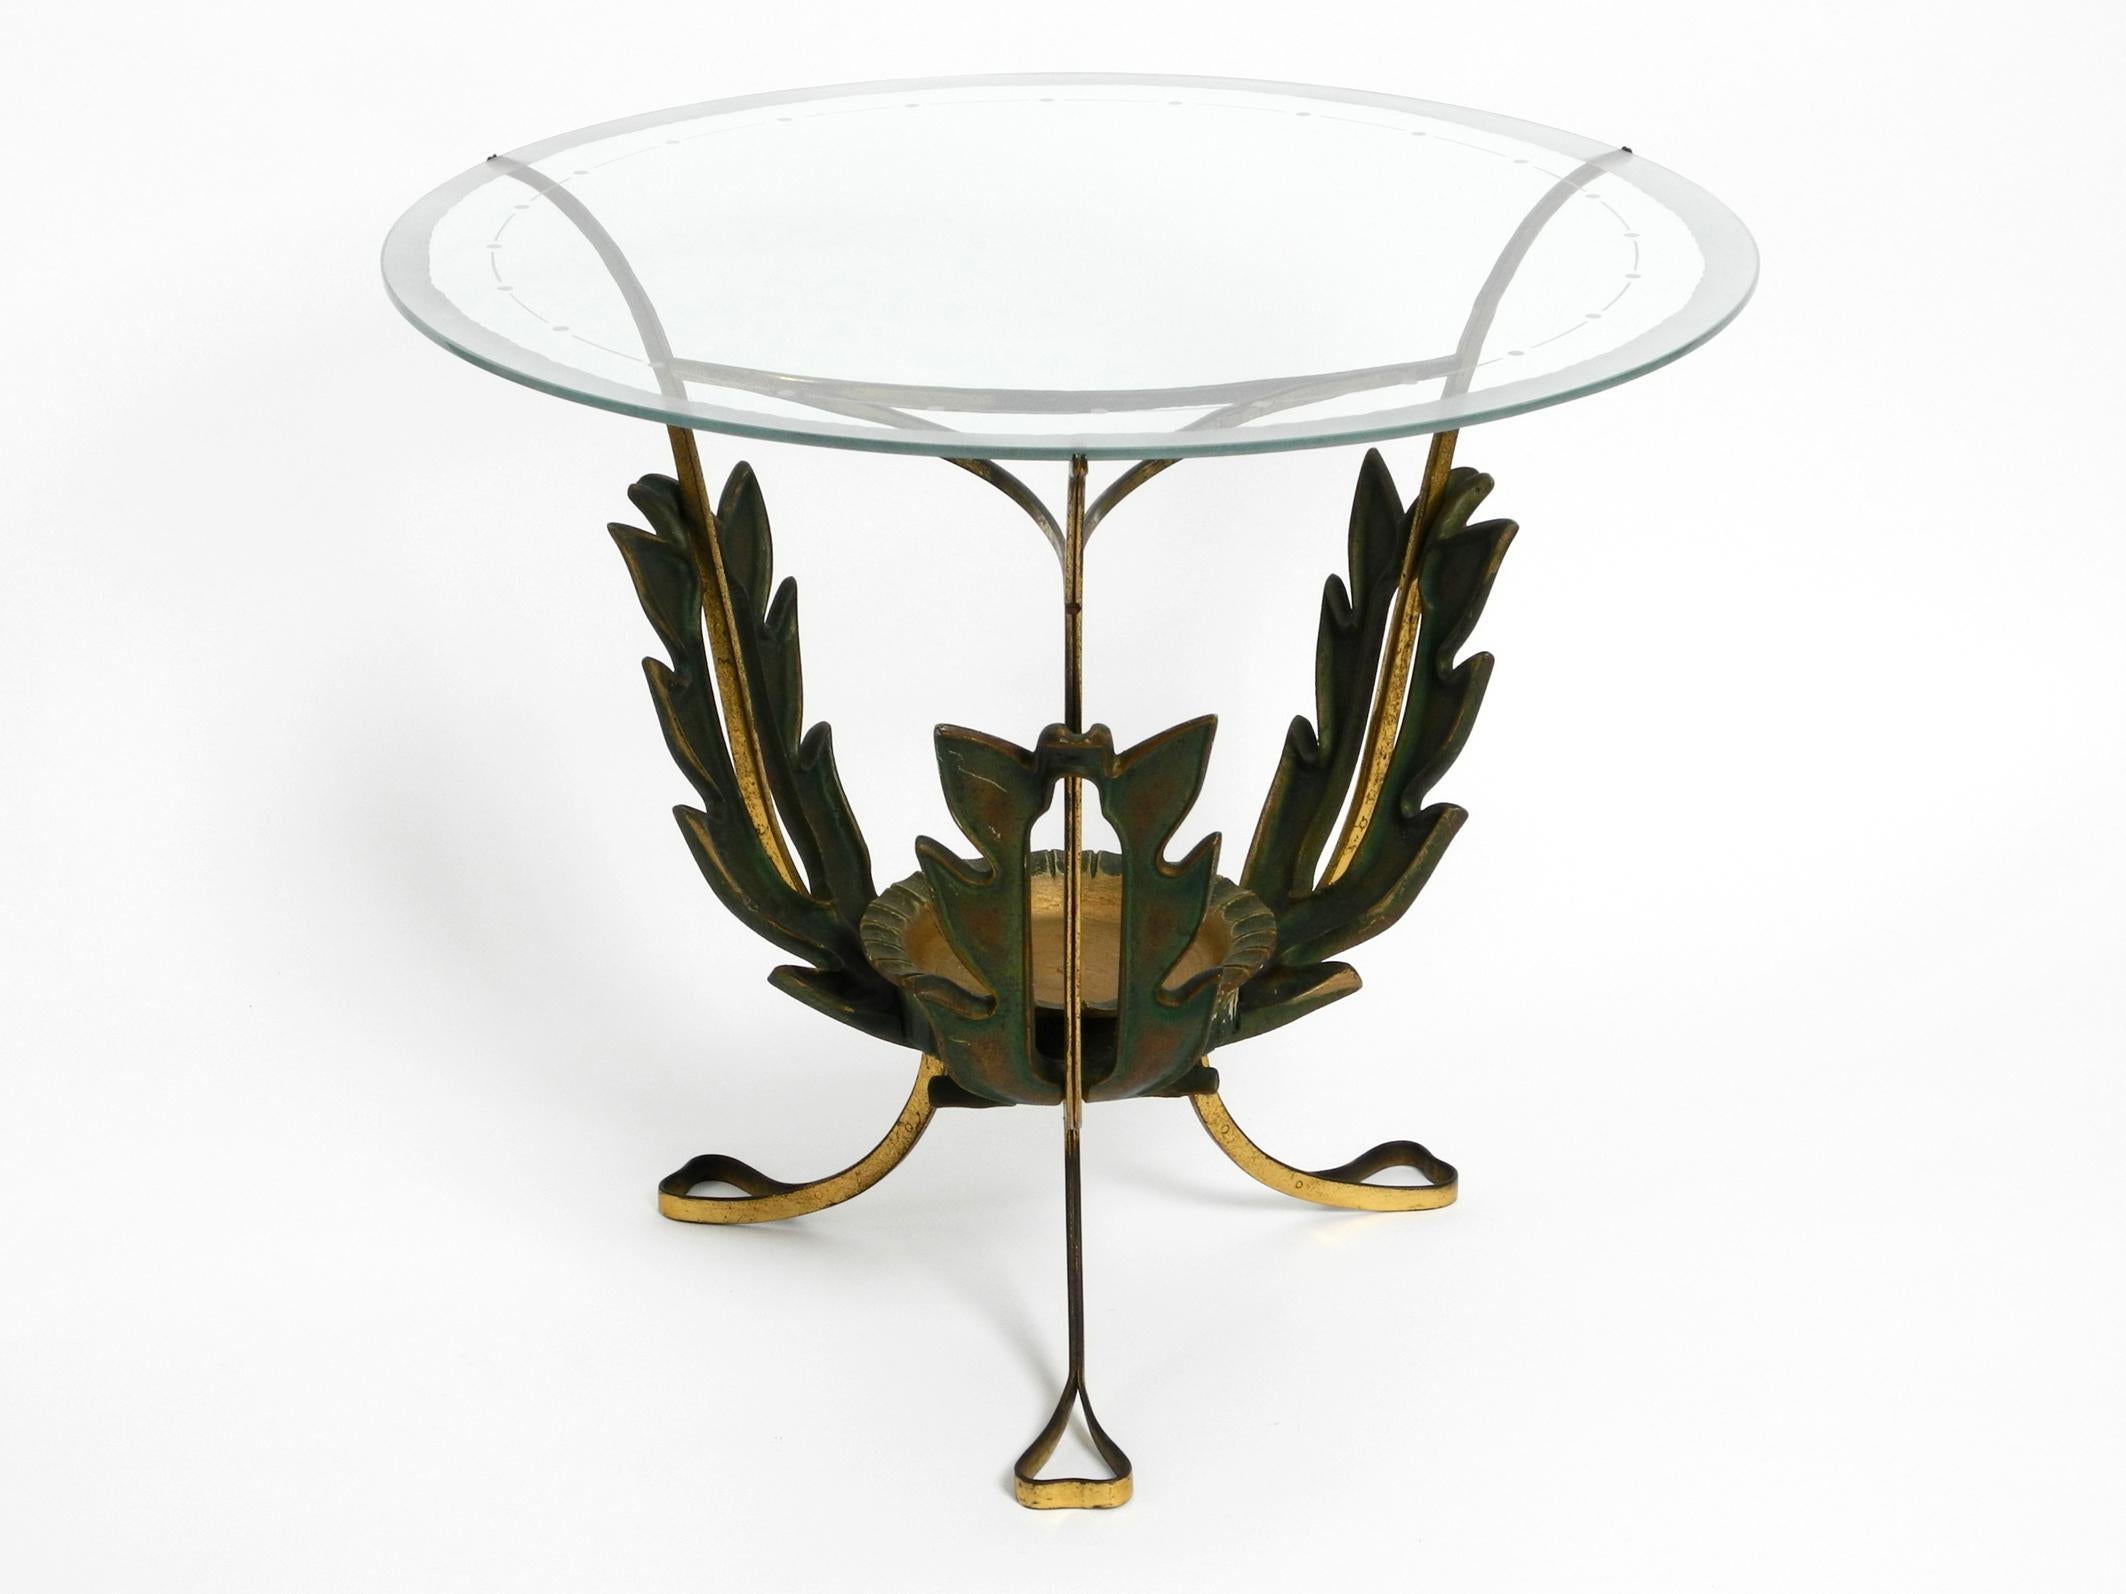 Very rare Italian original midcentury glass brass side table.
Beautiful 1950s floral design in a good vintage condition.
Frame is made entirely of brass and is in the shape of large long green leaves.
Original round glass plate, edge satin